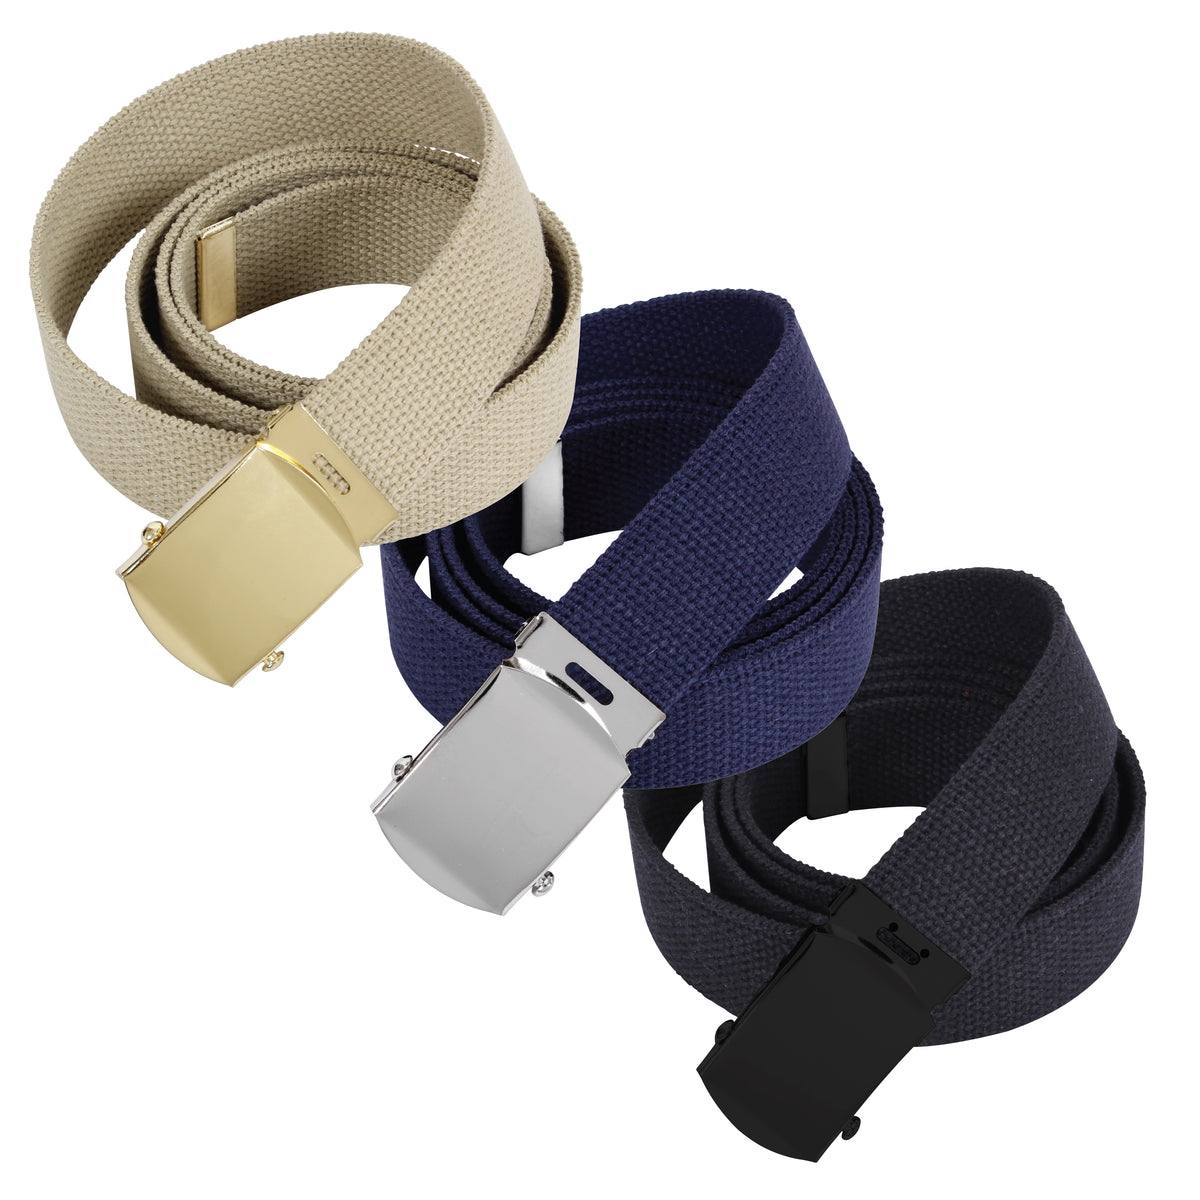 Rothco 54 Inch Military Web Belts in 3 Pack